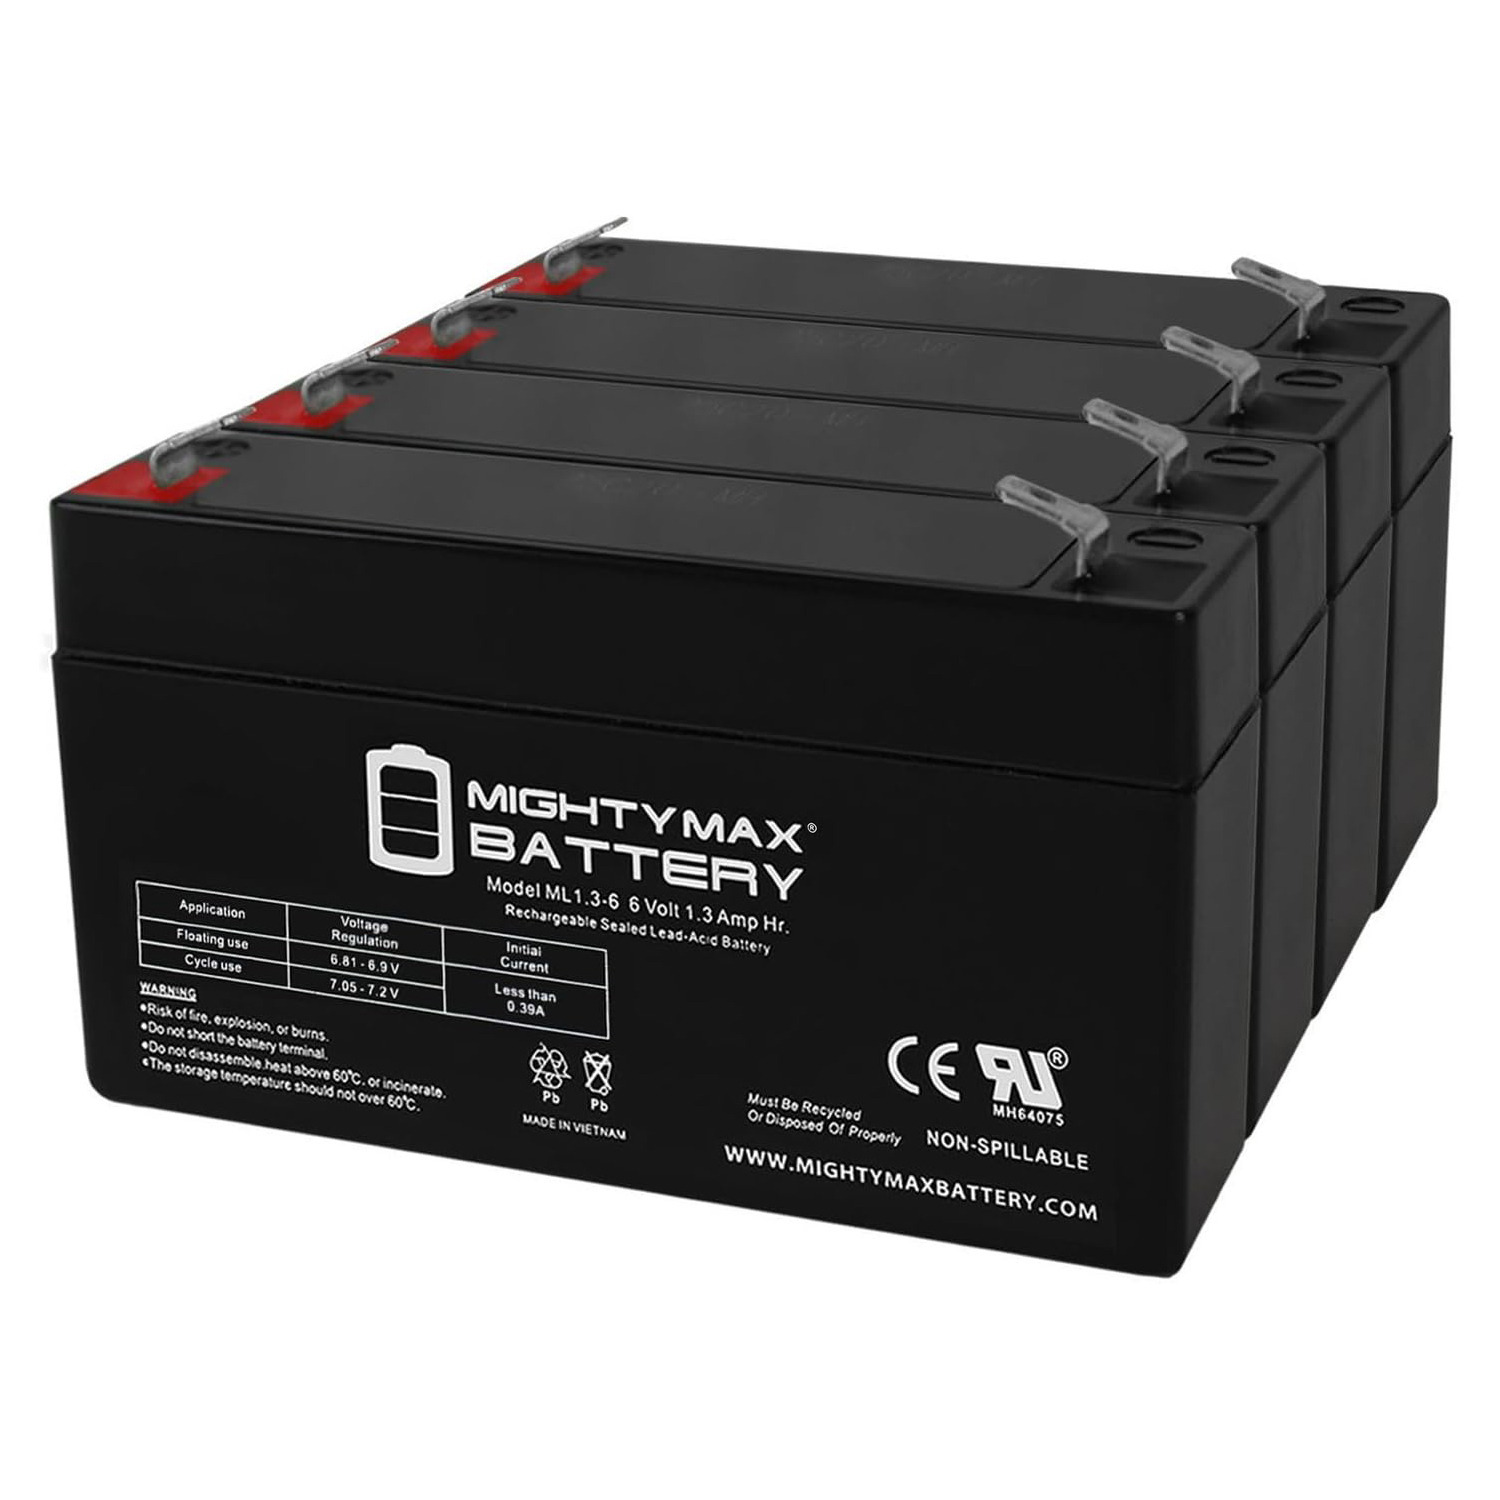 6V 1.3Ah SLA Replacement Battery for Powercell PC613 - 4 Pack